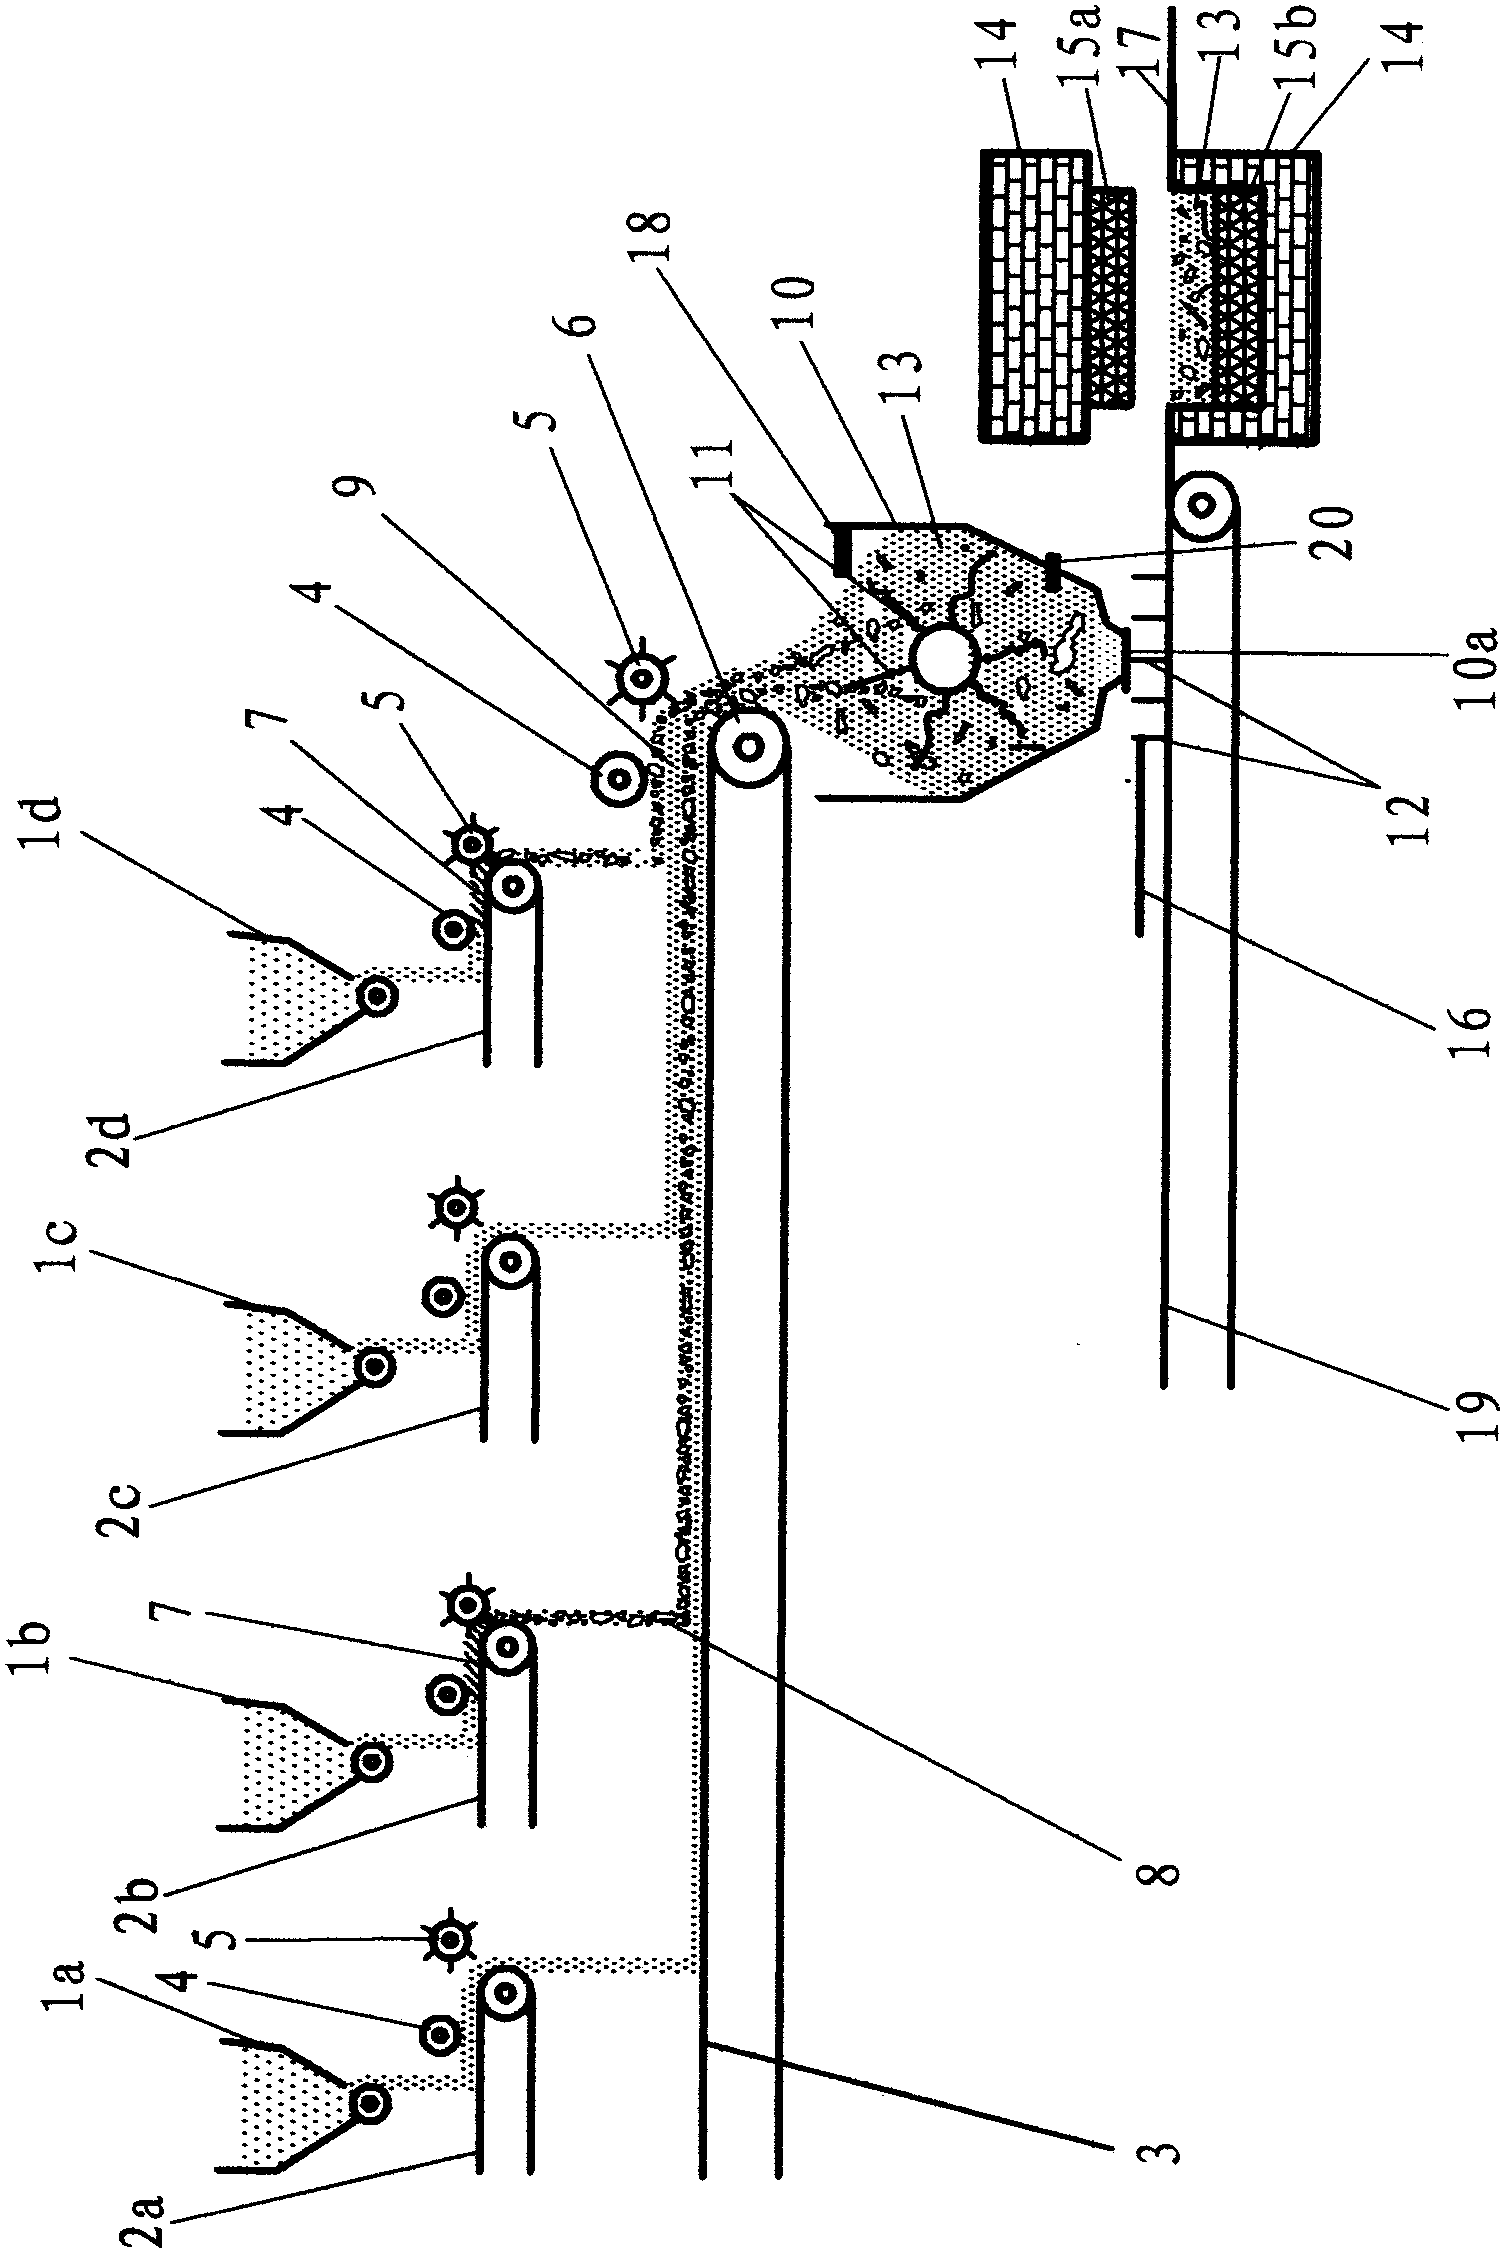 Application and method of pattern definition system for manufacturing stone imitating pattern ceramic product